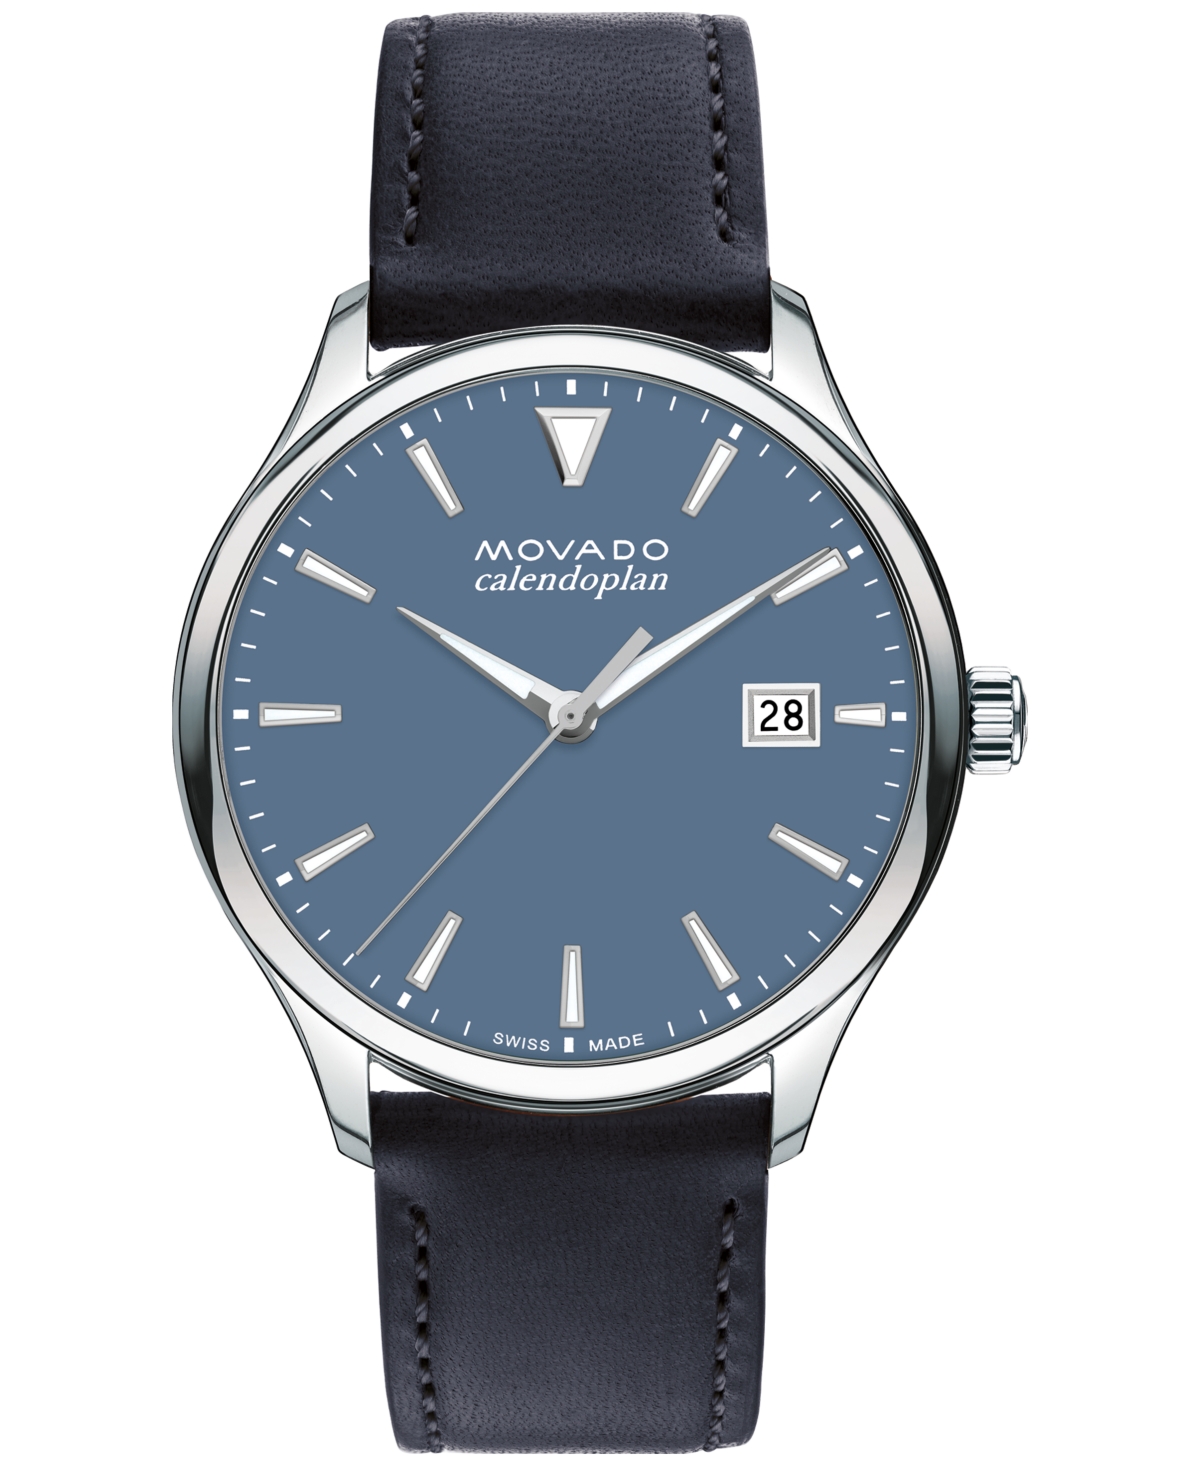 Movado Men's Calendoplan Stainless Steel & Leather Strap Watch/40mm In Blue